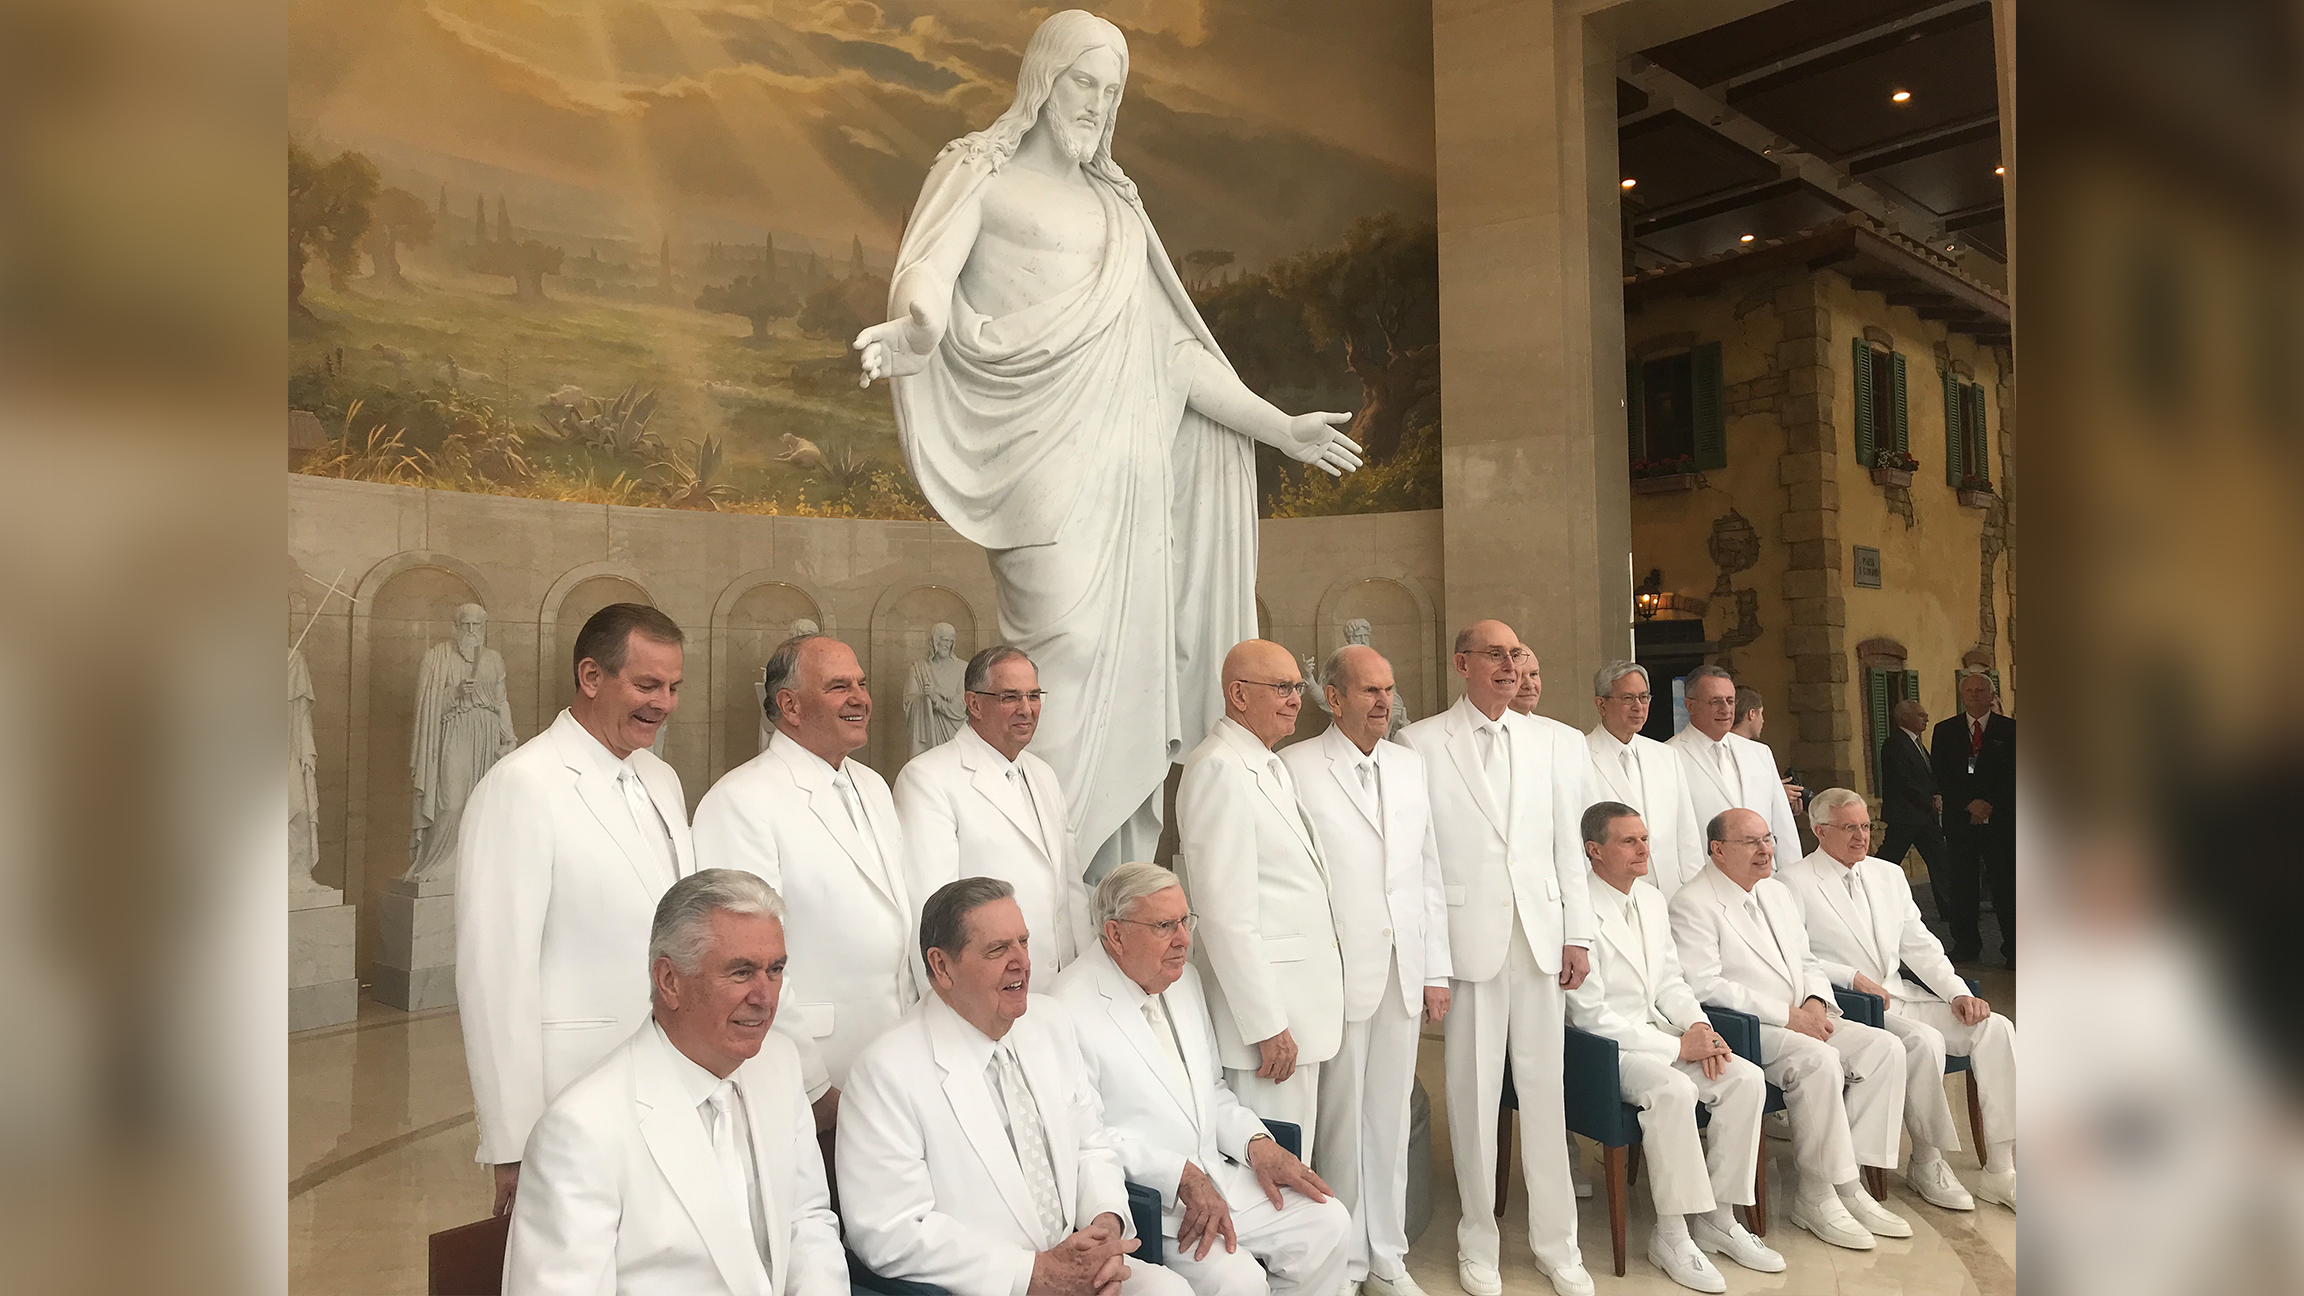 Latter-day Saint President M. Russell Ballard and the Quorum of the Twelve Apostles in Rome in 2019...